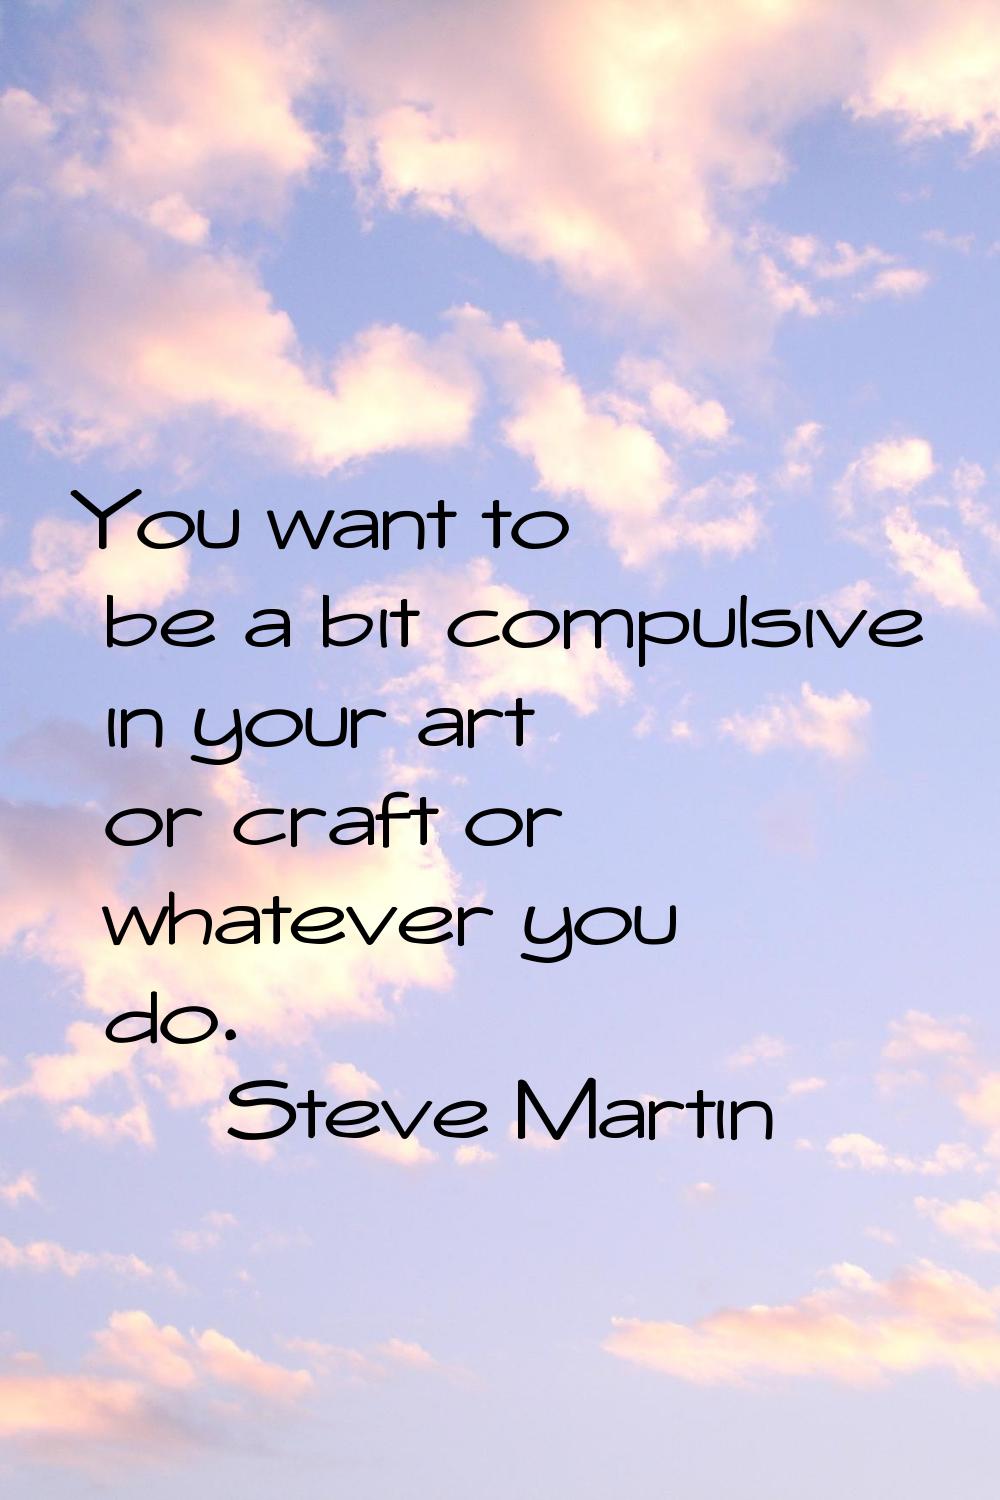 You want to be a bit compulsive in your art or craft or whatever you do.